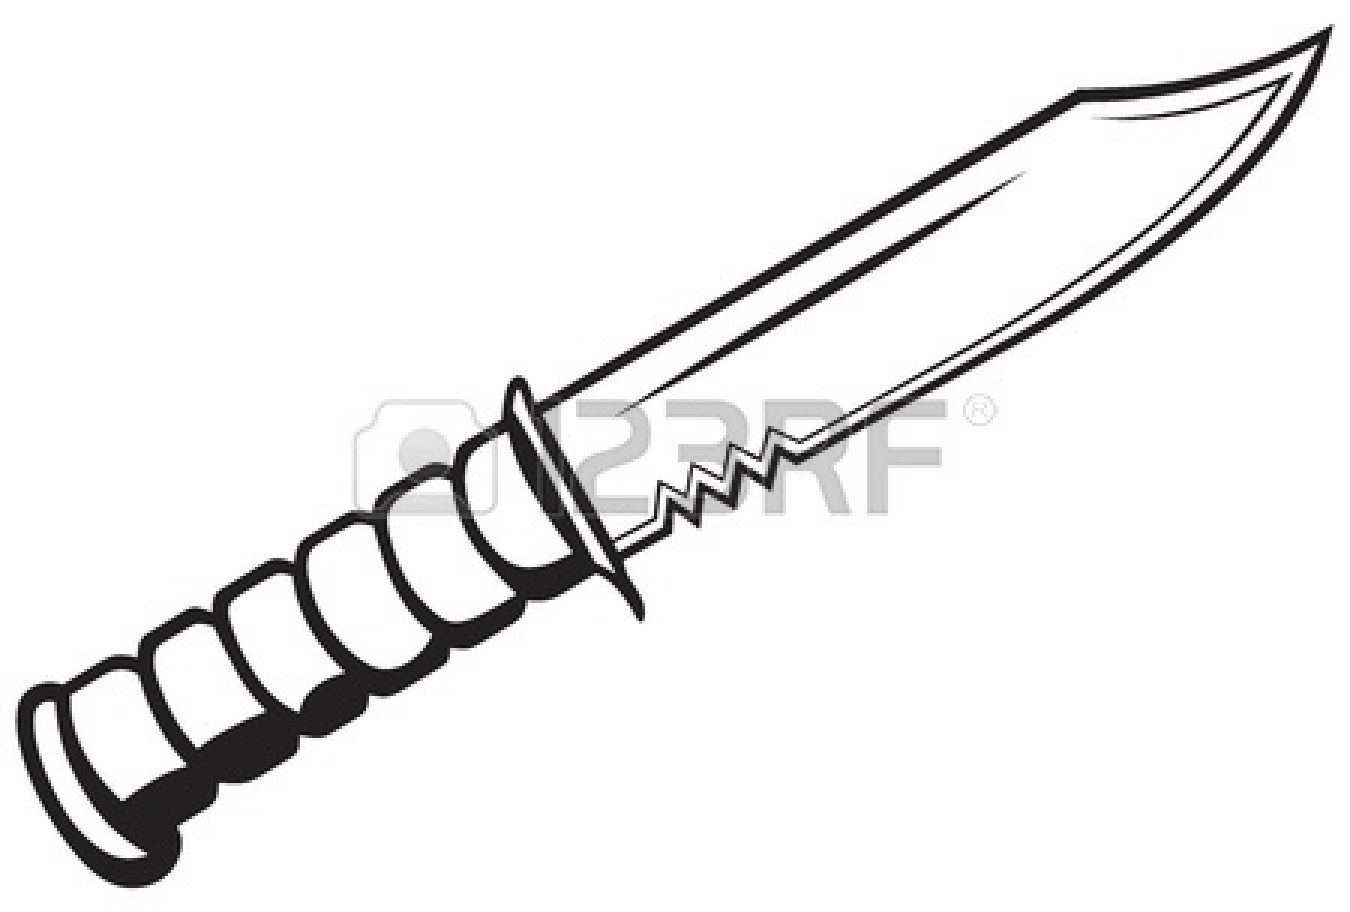 Knife Clipart Black And White Knife Clipart Black And White